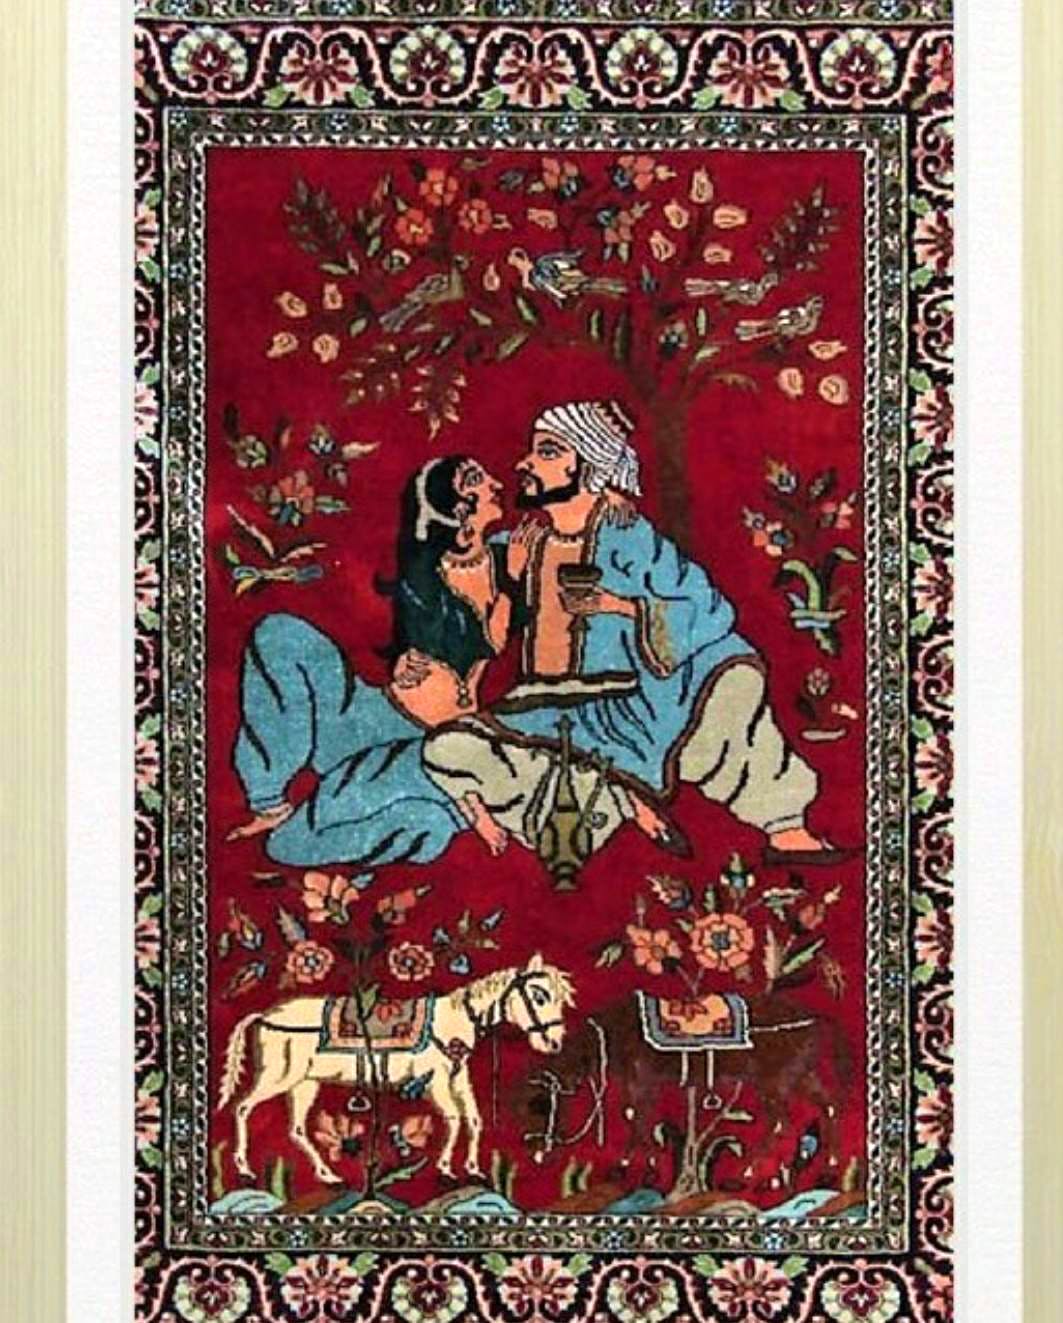 Textile,Art,Tapestry,Poster,Miniature,Painting,Illustration